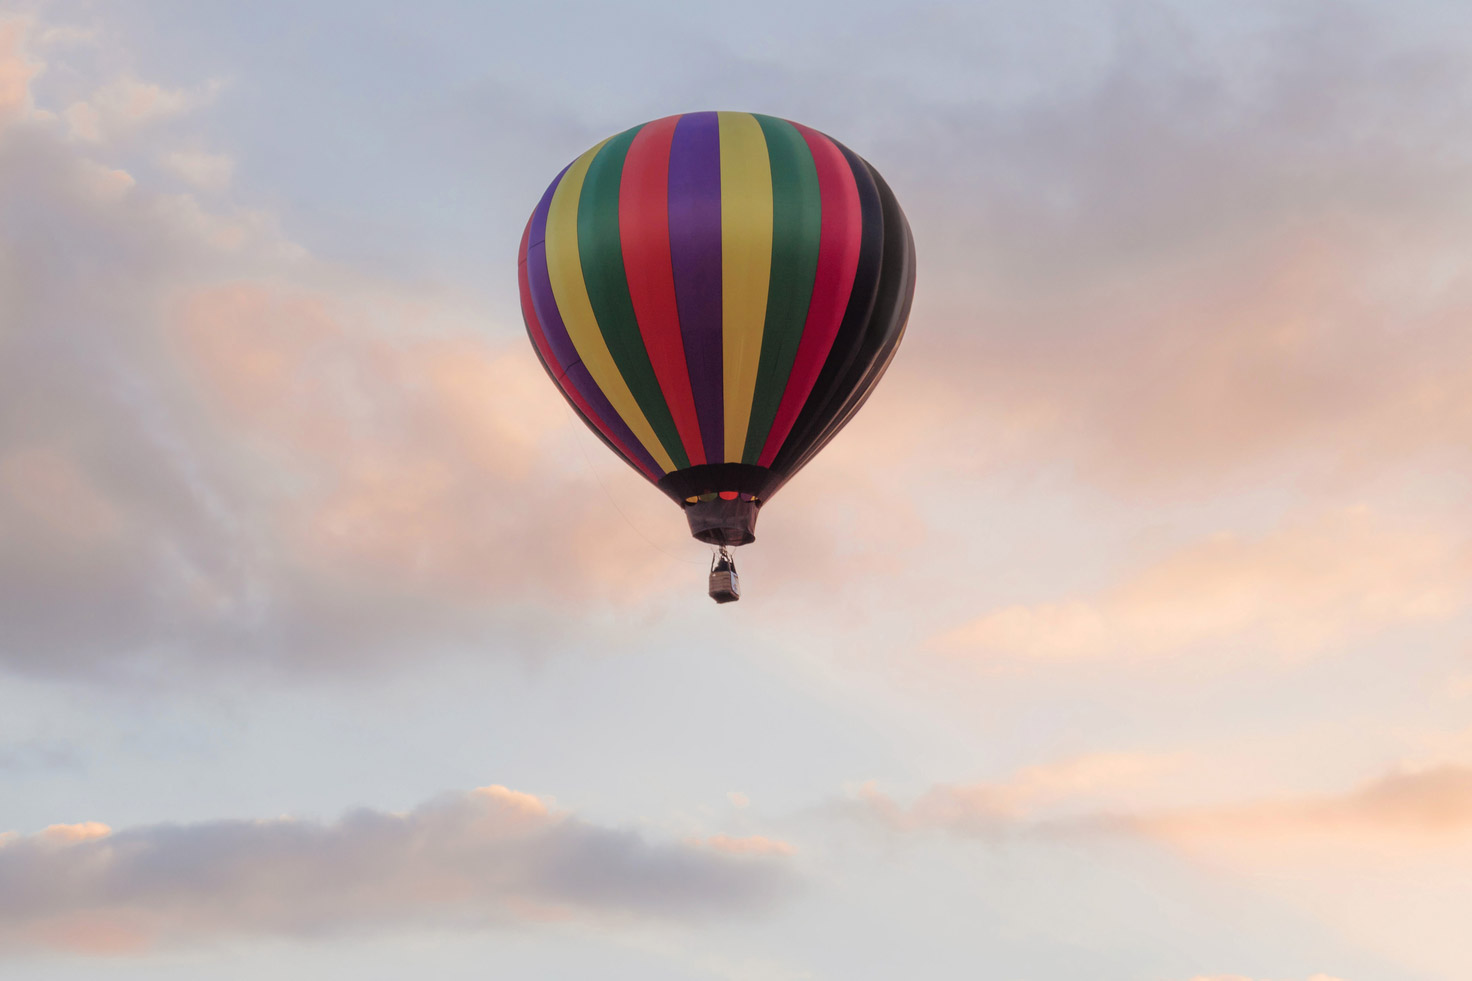 Beautiful rise of colorful hot air balloon at sunrise